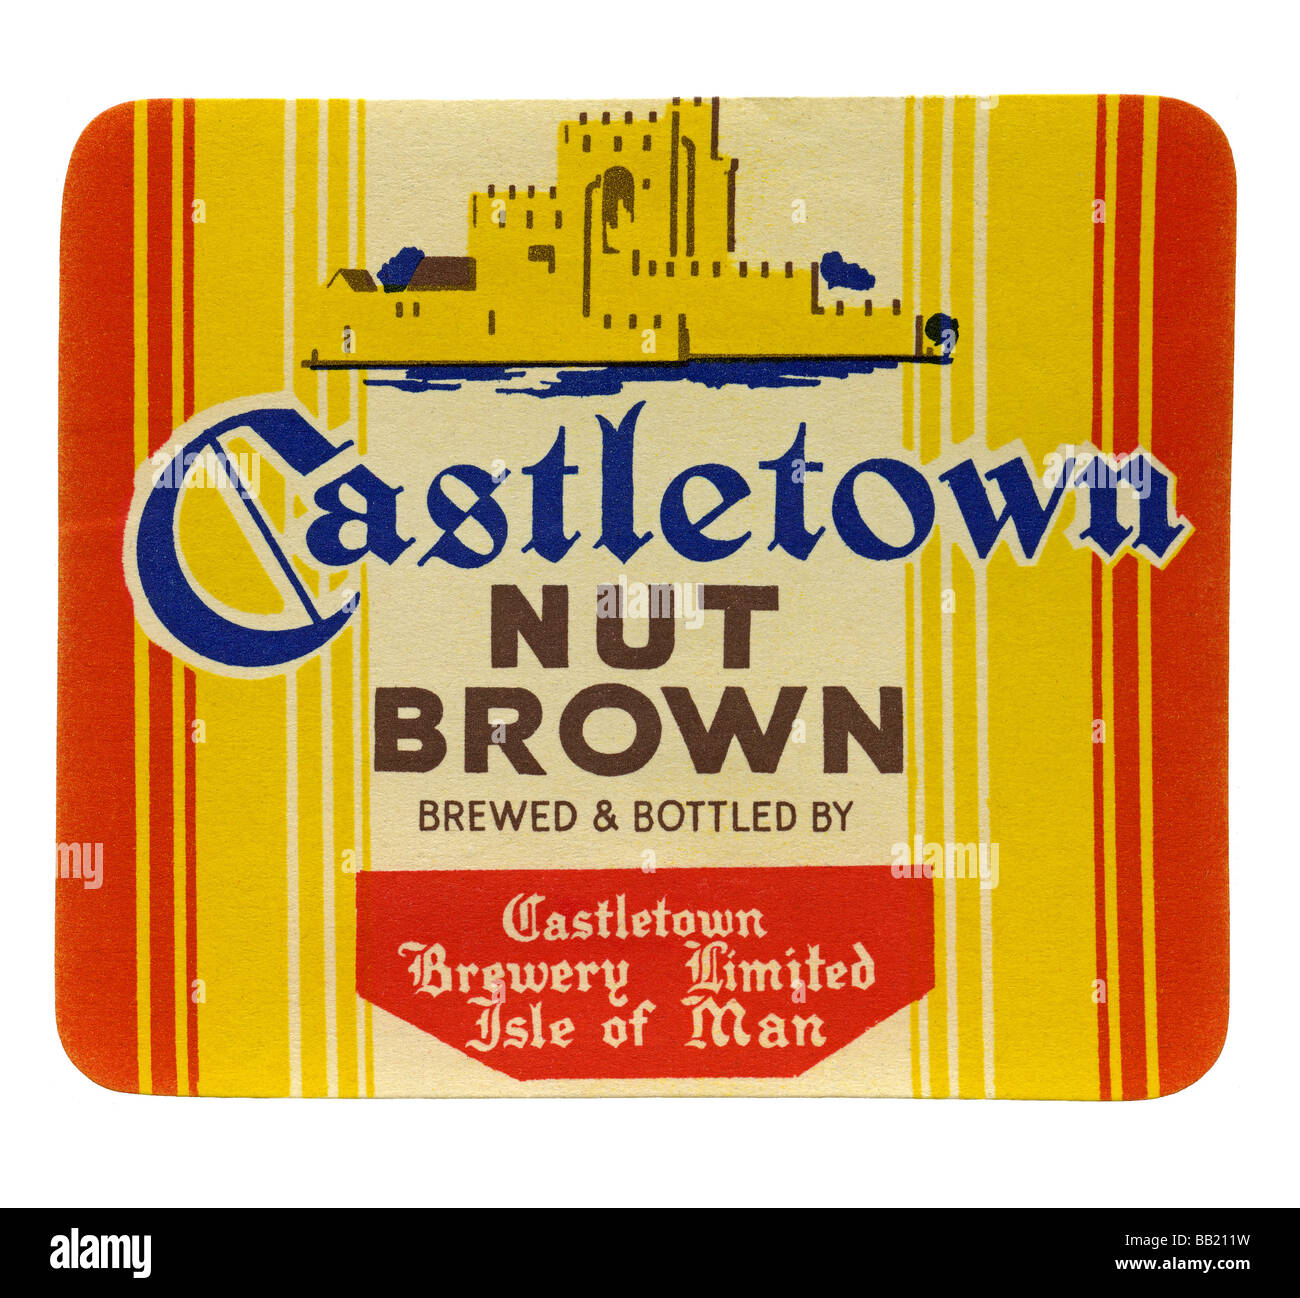 Old British beer label for Castletown Nut Brown, Castletown, Isle of Man Stock Photo